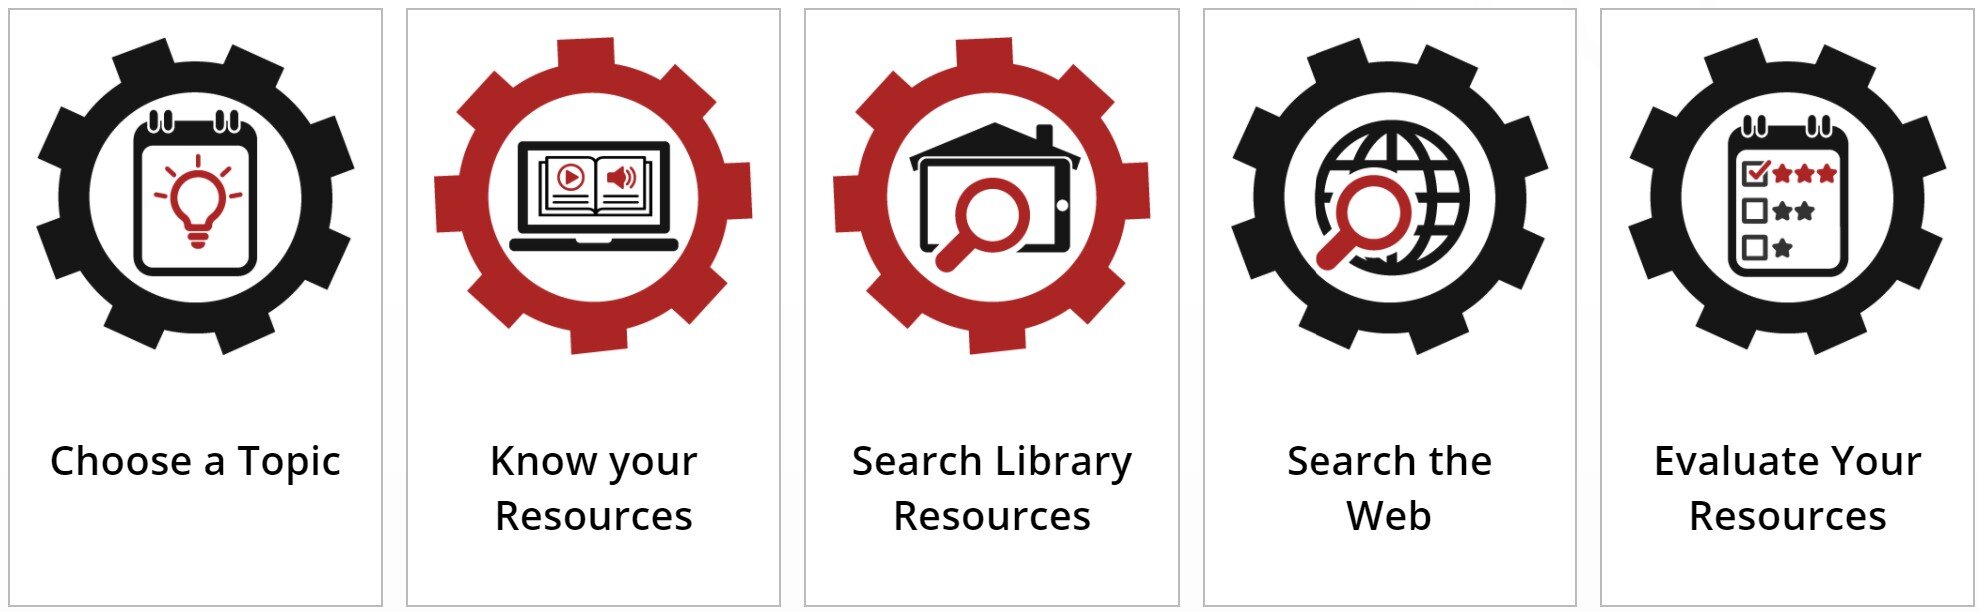  Five lessons of the How to Research section: Choose a Topic, Know Your Resources, Search Library Resources, Search the Web, Evaluate Your Resources. Each lesson uses modular, micro-learning type content to introduce topics.  